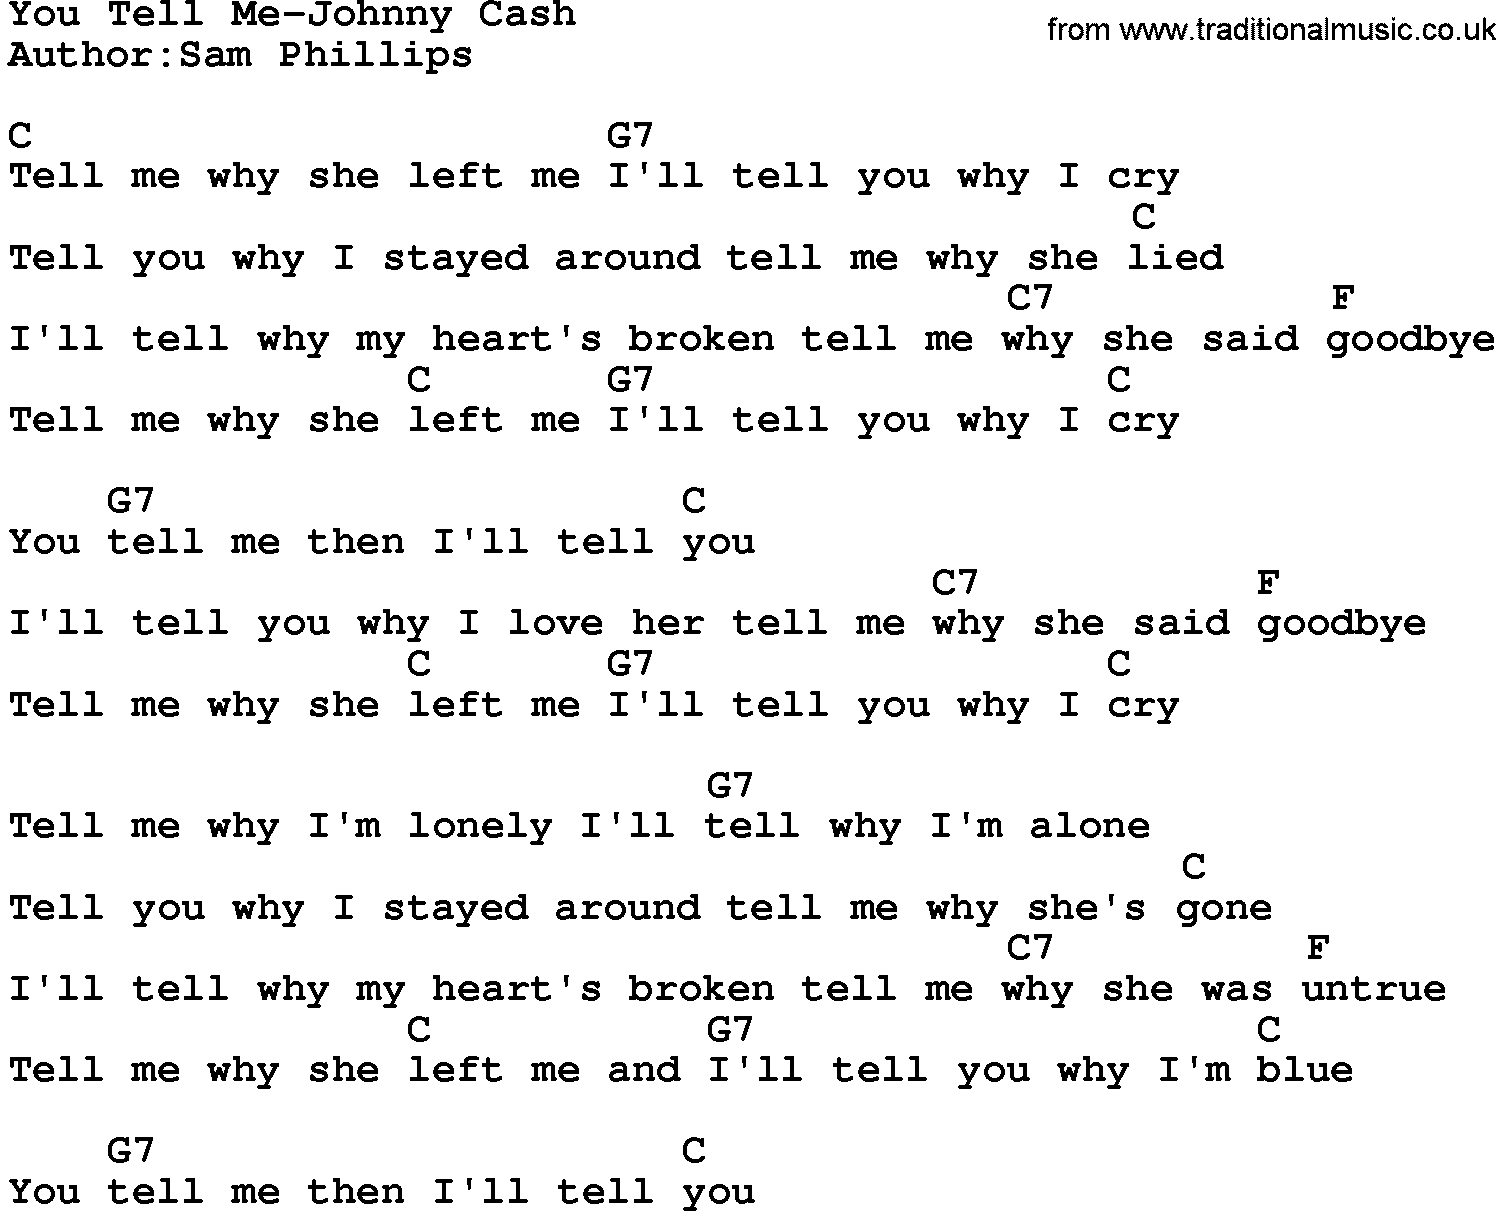 Country music song: You Tell Me-Johnny Cash lyrics and chords